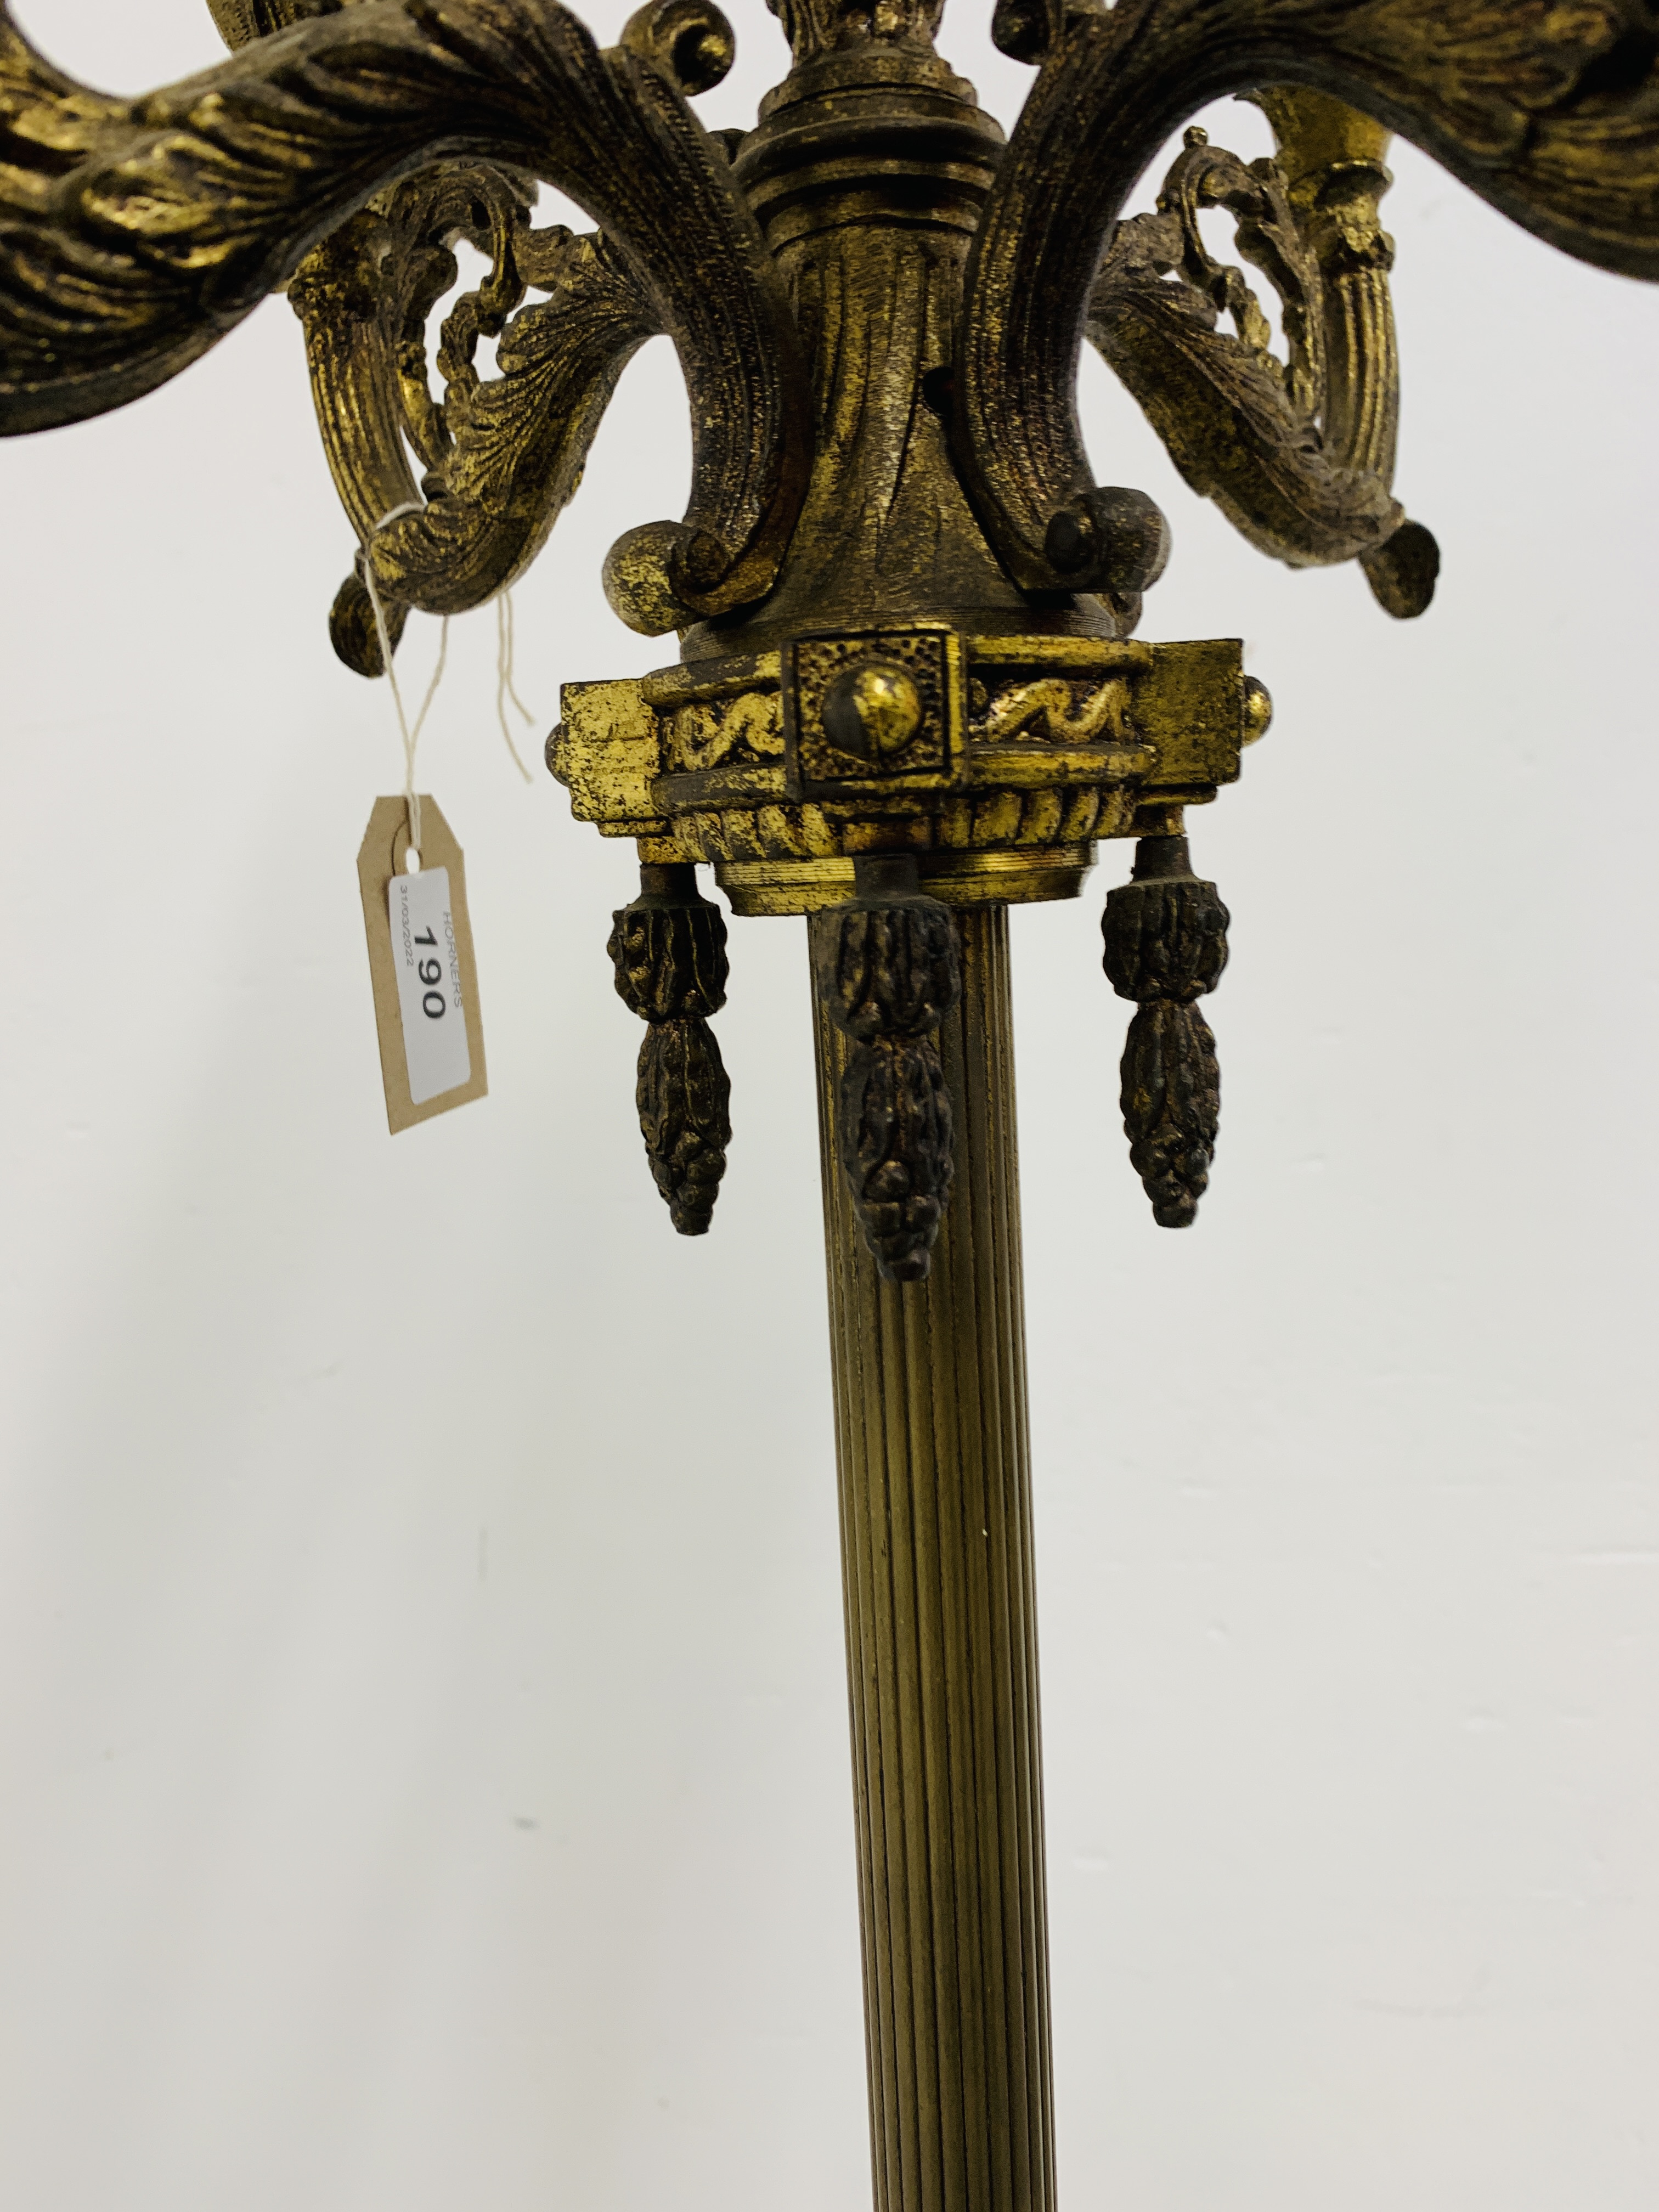 A CORINTHIAN COLUMN FLOOR STANDING FIVE BRANCH LAMP STANDARD THE BASE WITH MARBLE PLATFORM AND CLAW - Image 10 of 16